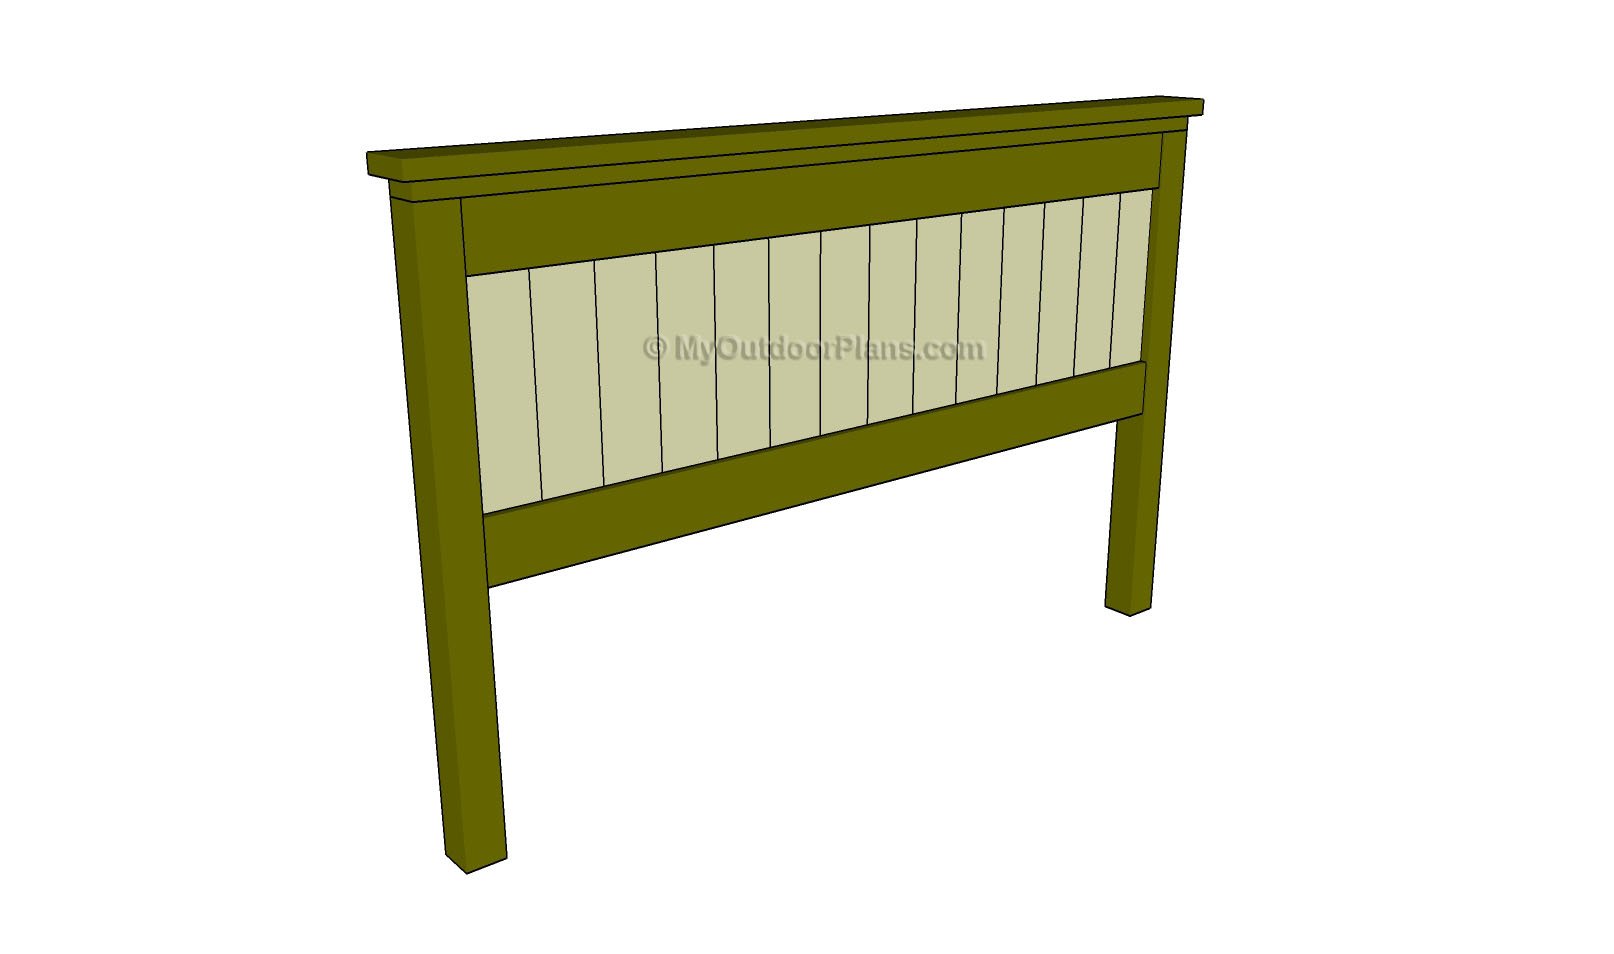 Bed Headboard Plans  Free Outdoor Plans - DIY Shed, Wooden Playhouse 